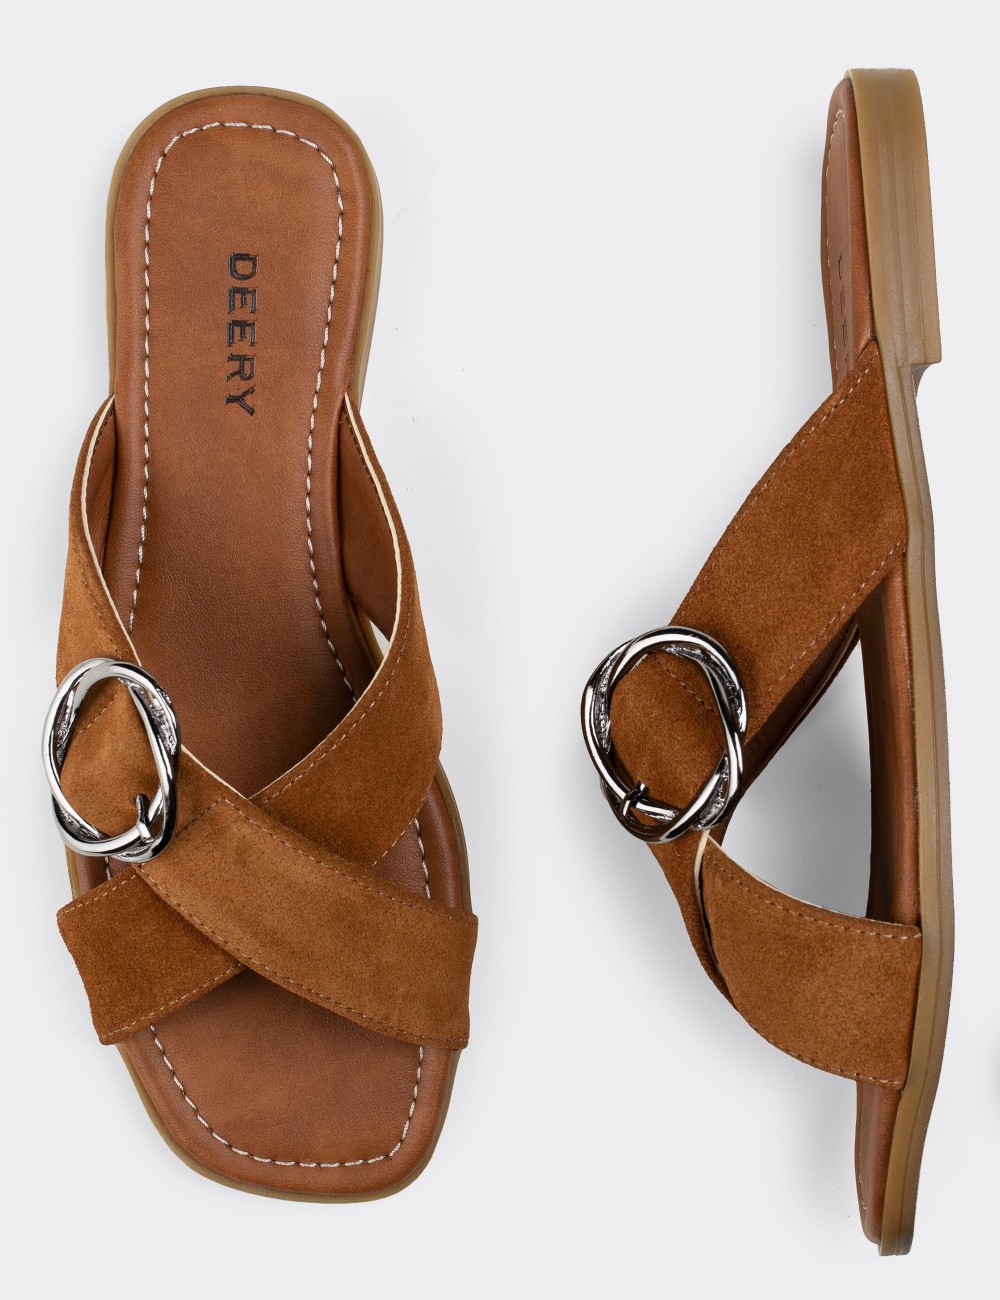 Tan Suede Leather Sandals - E2136ZTBAC01